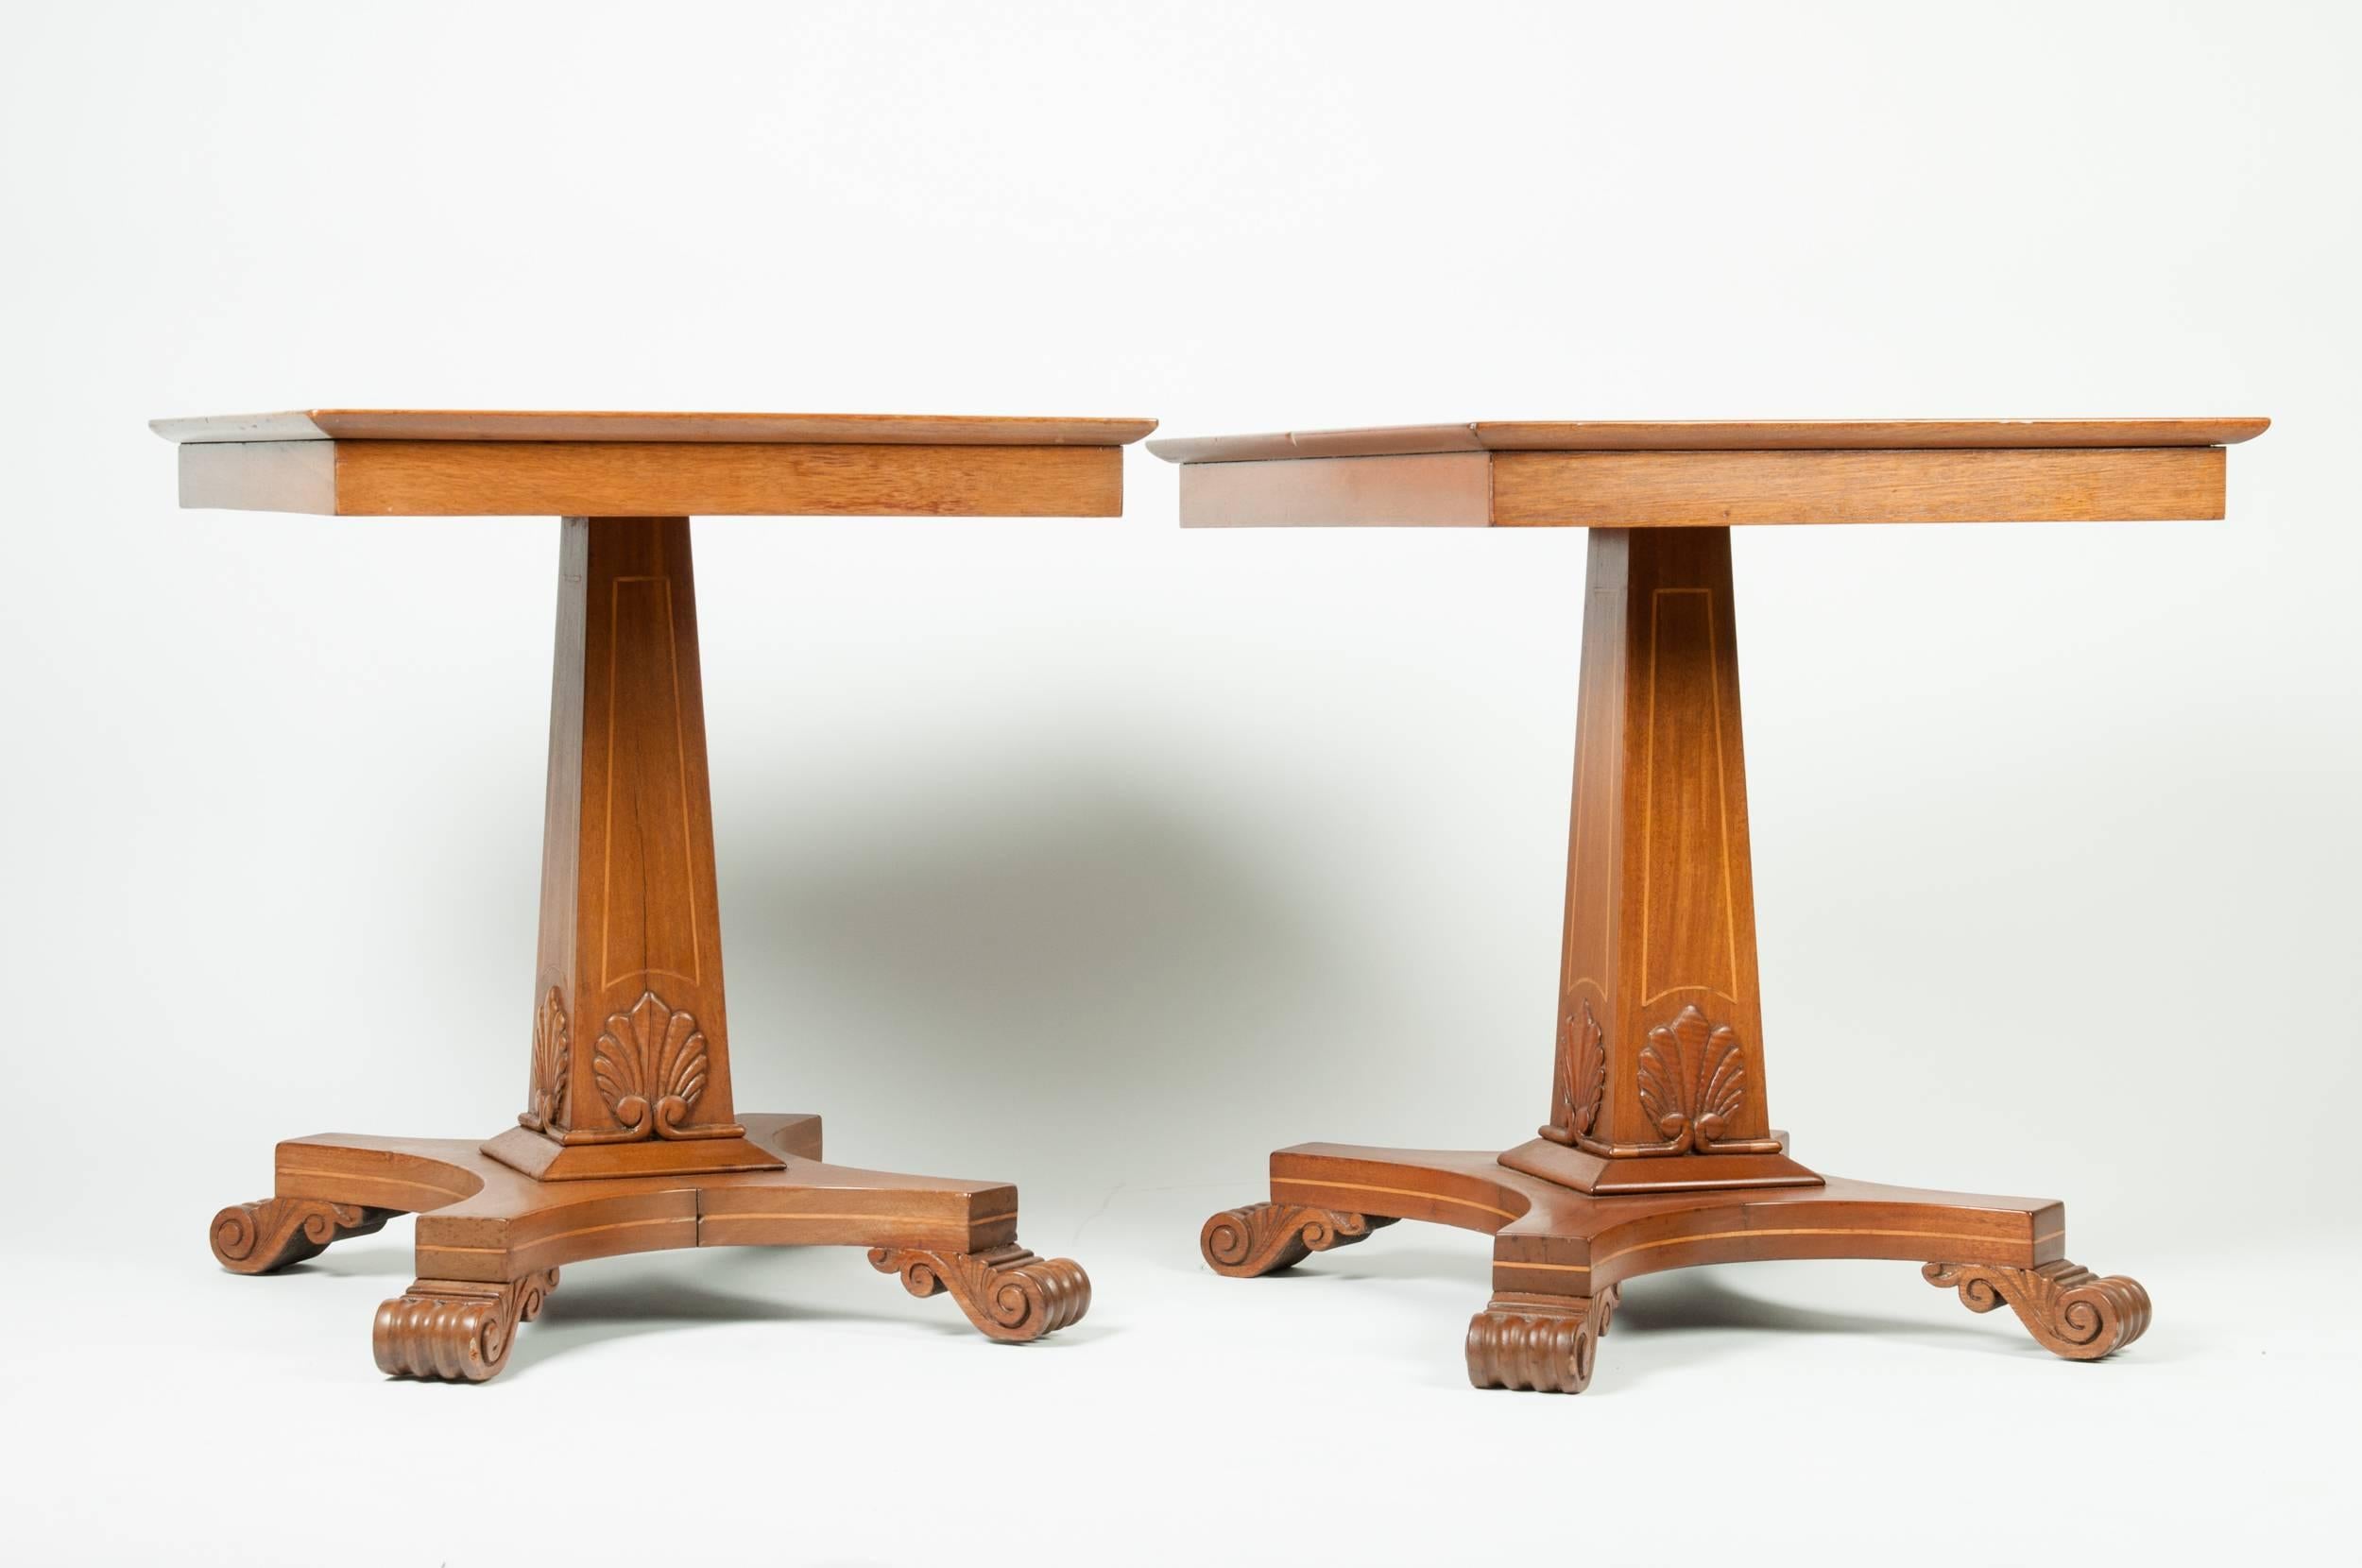 An antique pair of square light mahogany wood end or side tables. Each table measure 28 inches long x 23 inches width x 26 inches high.